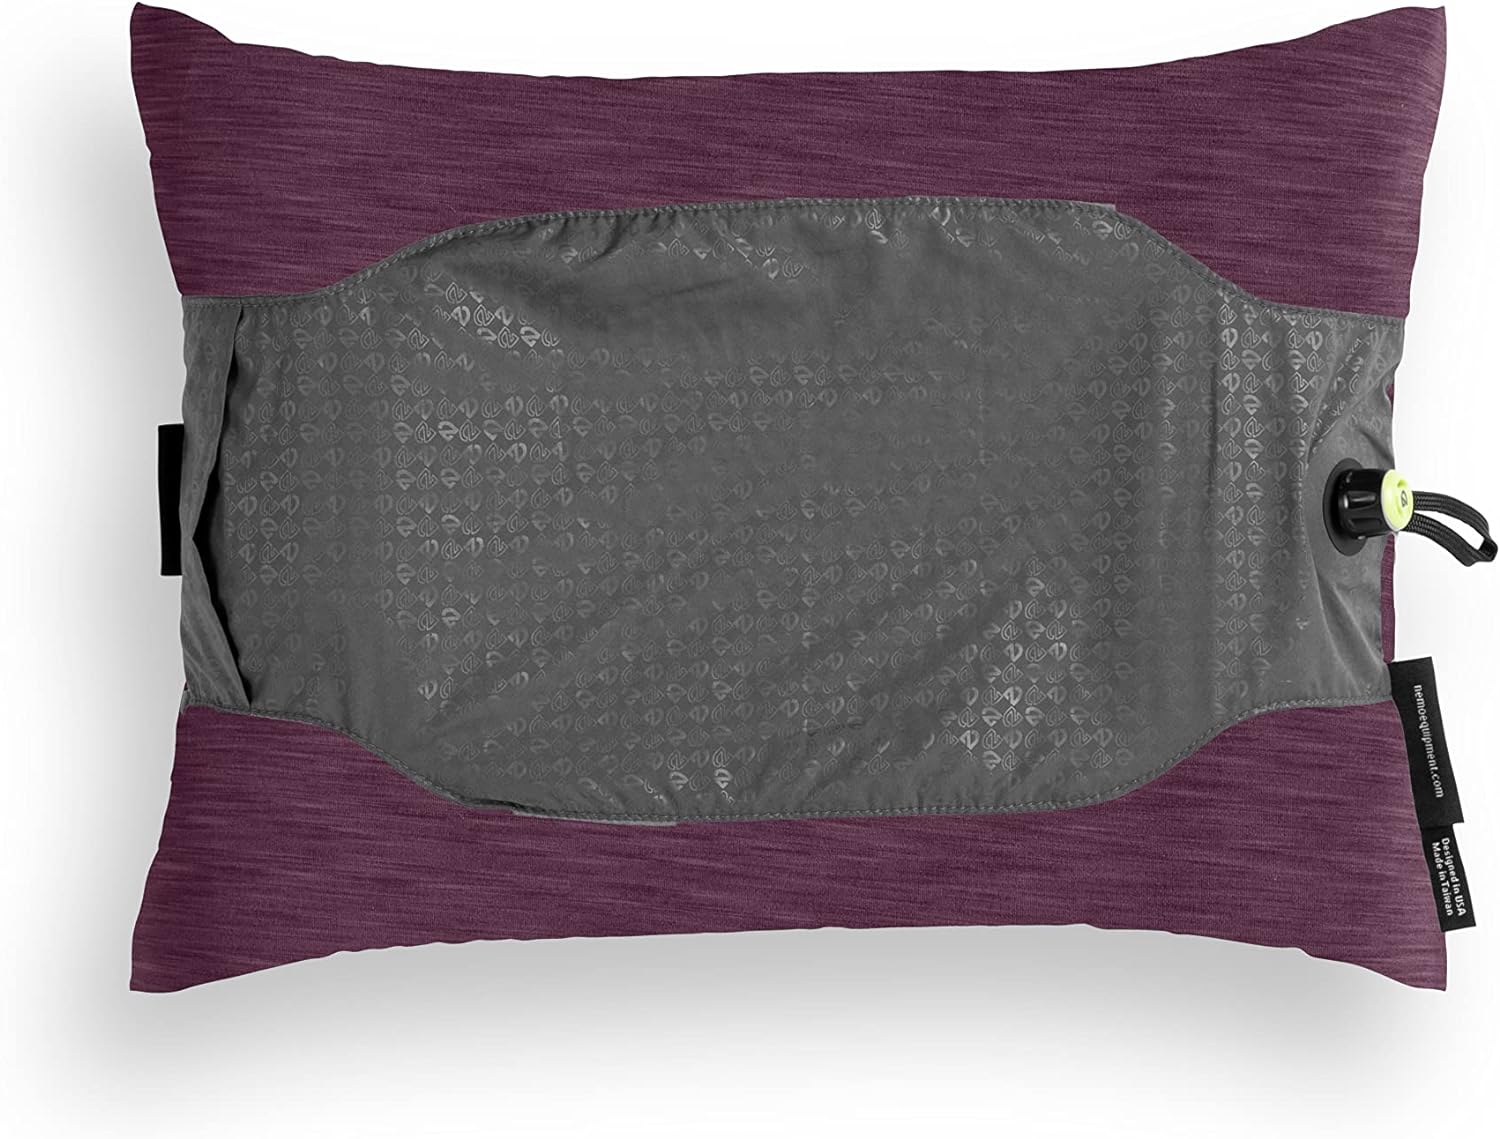 NEMO Fillo Elite Ultralight Pillow | Inflatable Backpacking Pillow for Travel, Backpacking, and Camping, Huckleberry